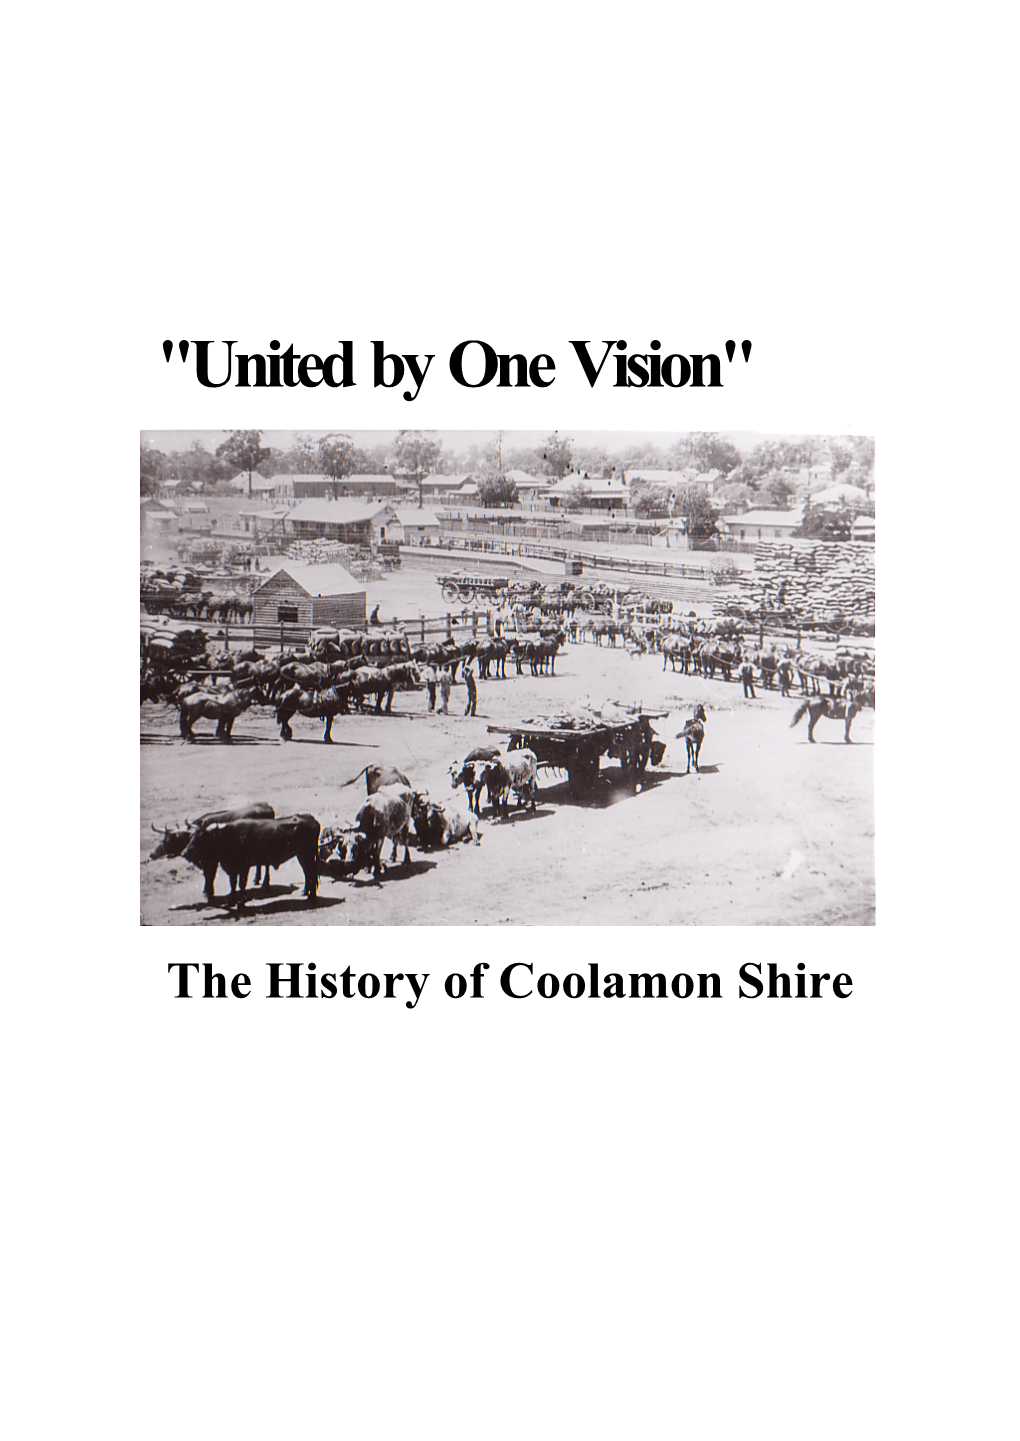 "United by One Vision"